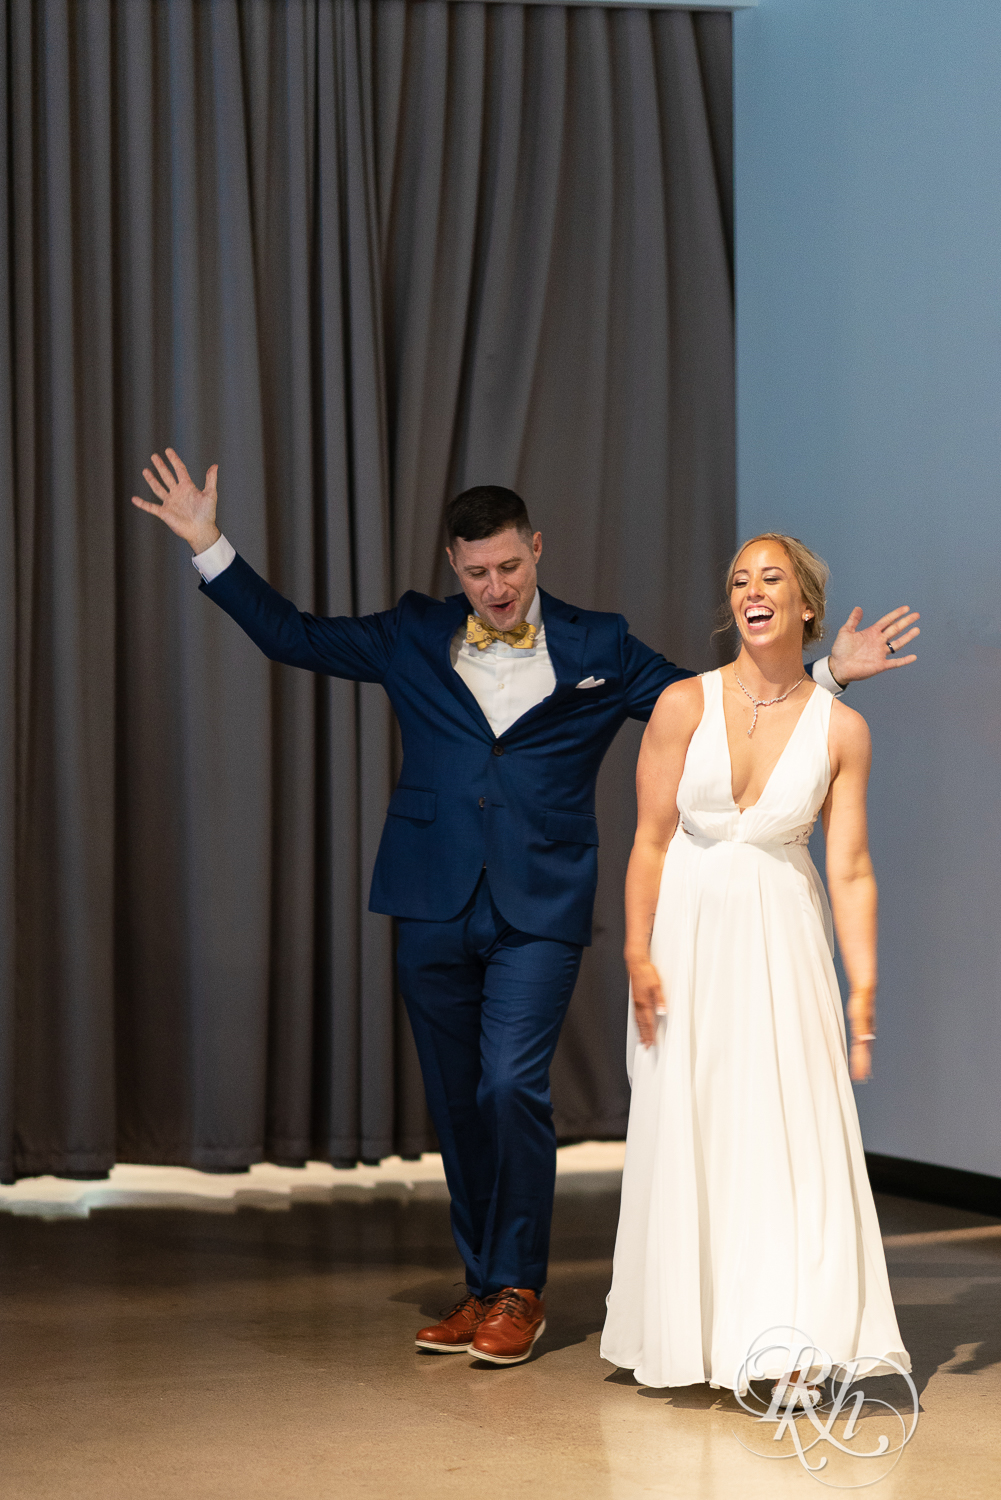 Bride and groom dance in during grand entrance at Saint Paul Event Center in Saint Paul, Minnesota.